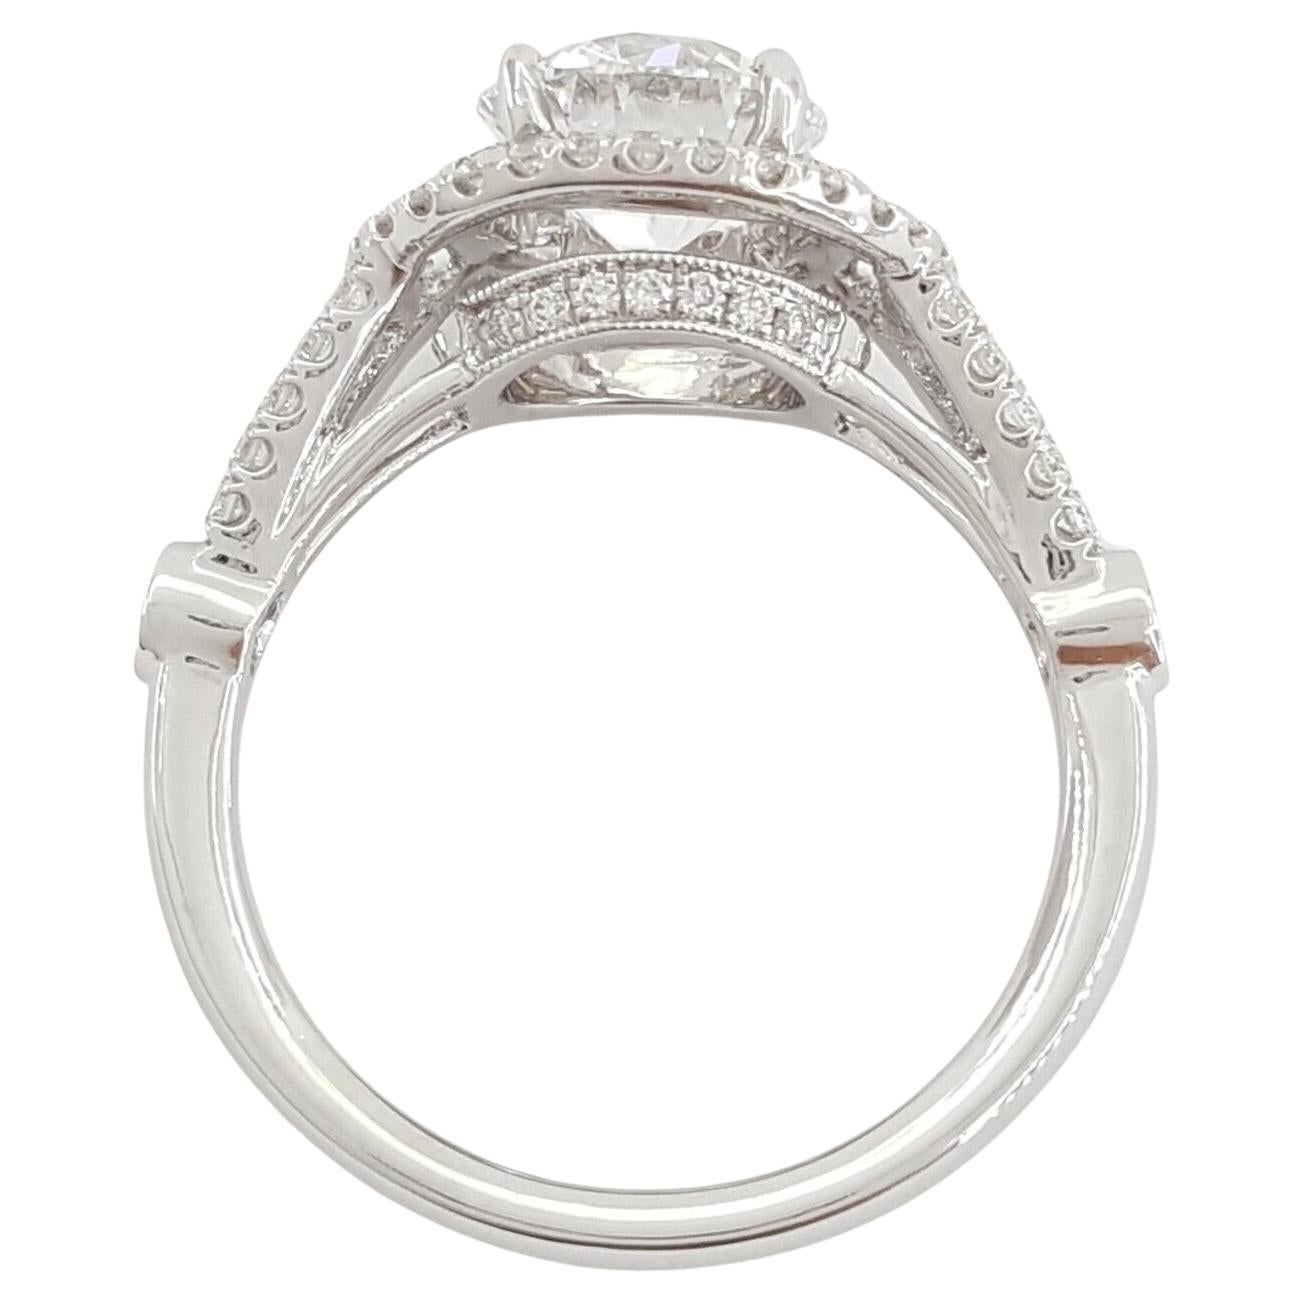 Hearts on Fire 2.16 ct Total Weight Round Brilliant Cut Diamond Double Halo Supreme Platinum Engagement Ring.